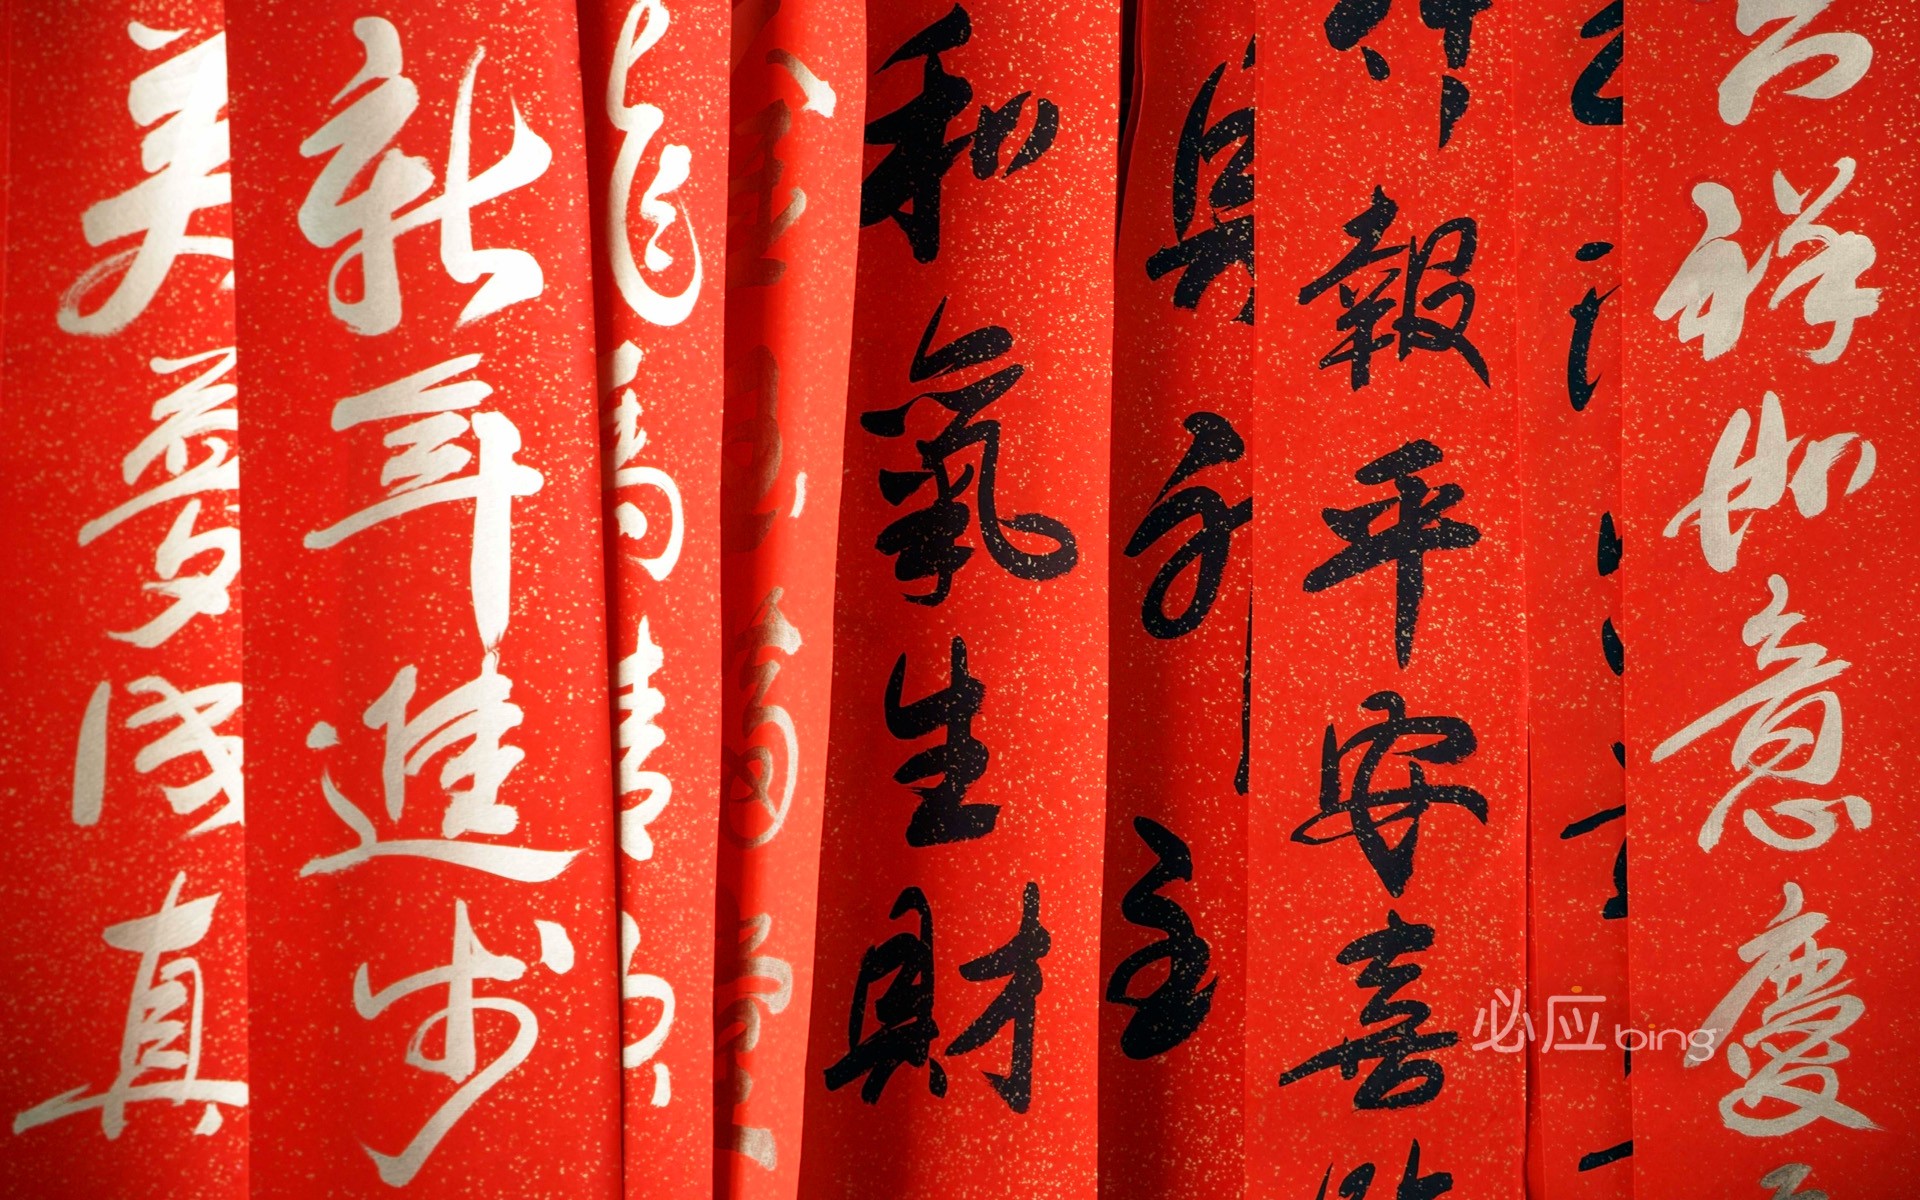 General 1920x1200 calligraphy festivals New Year red closeup watermarked Bing